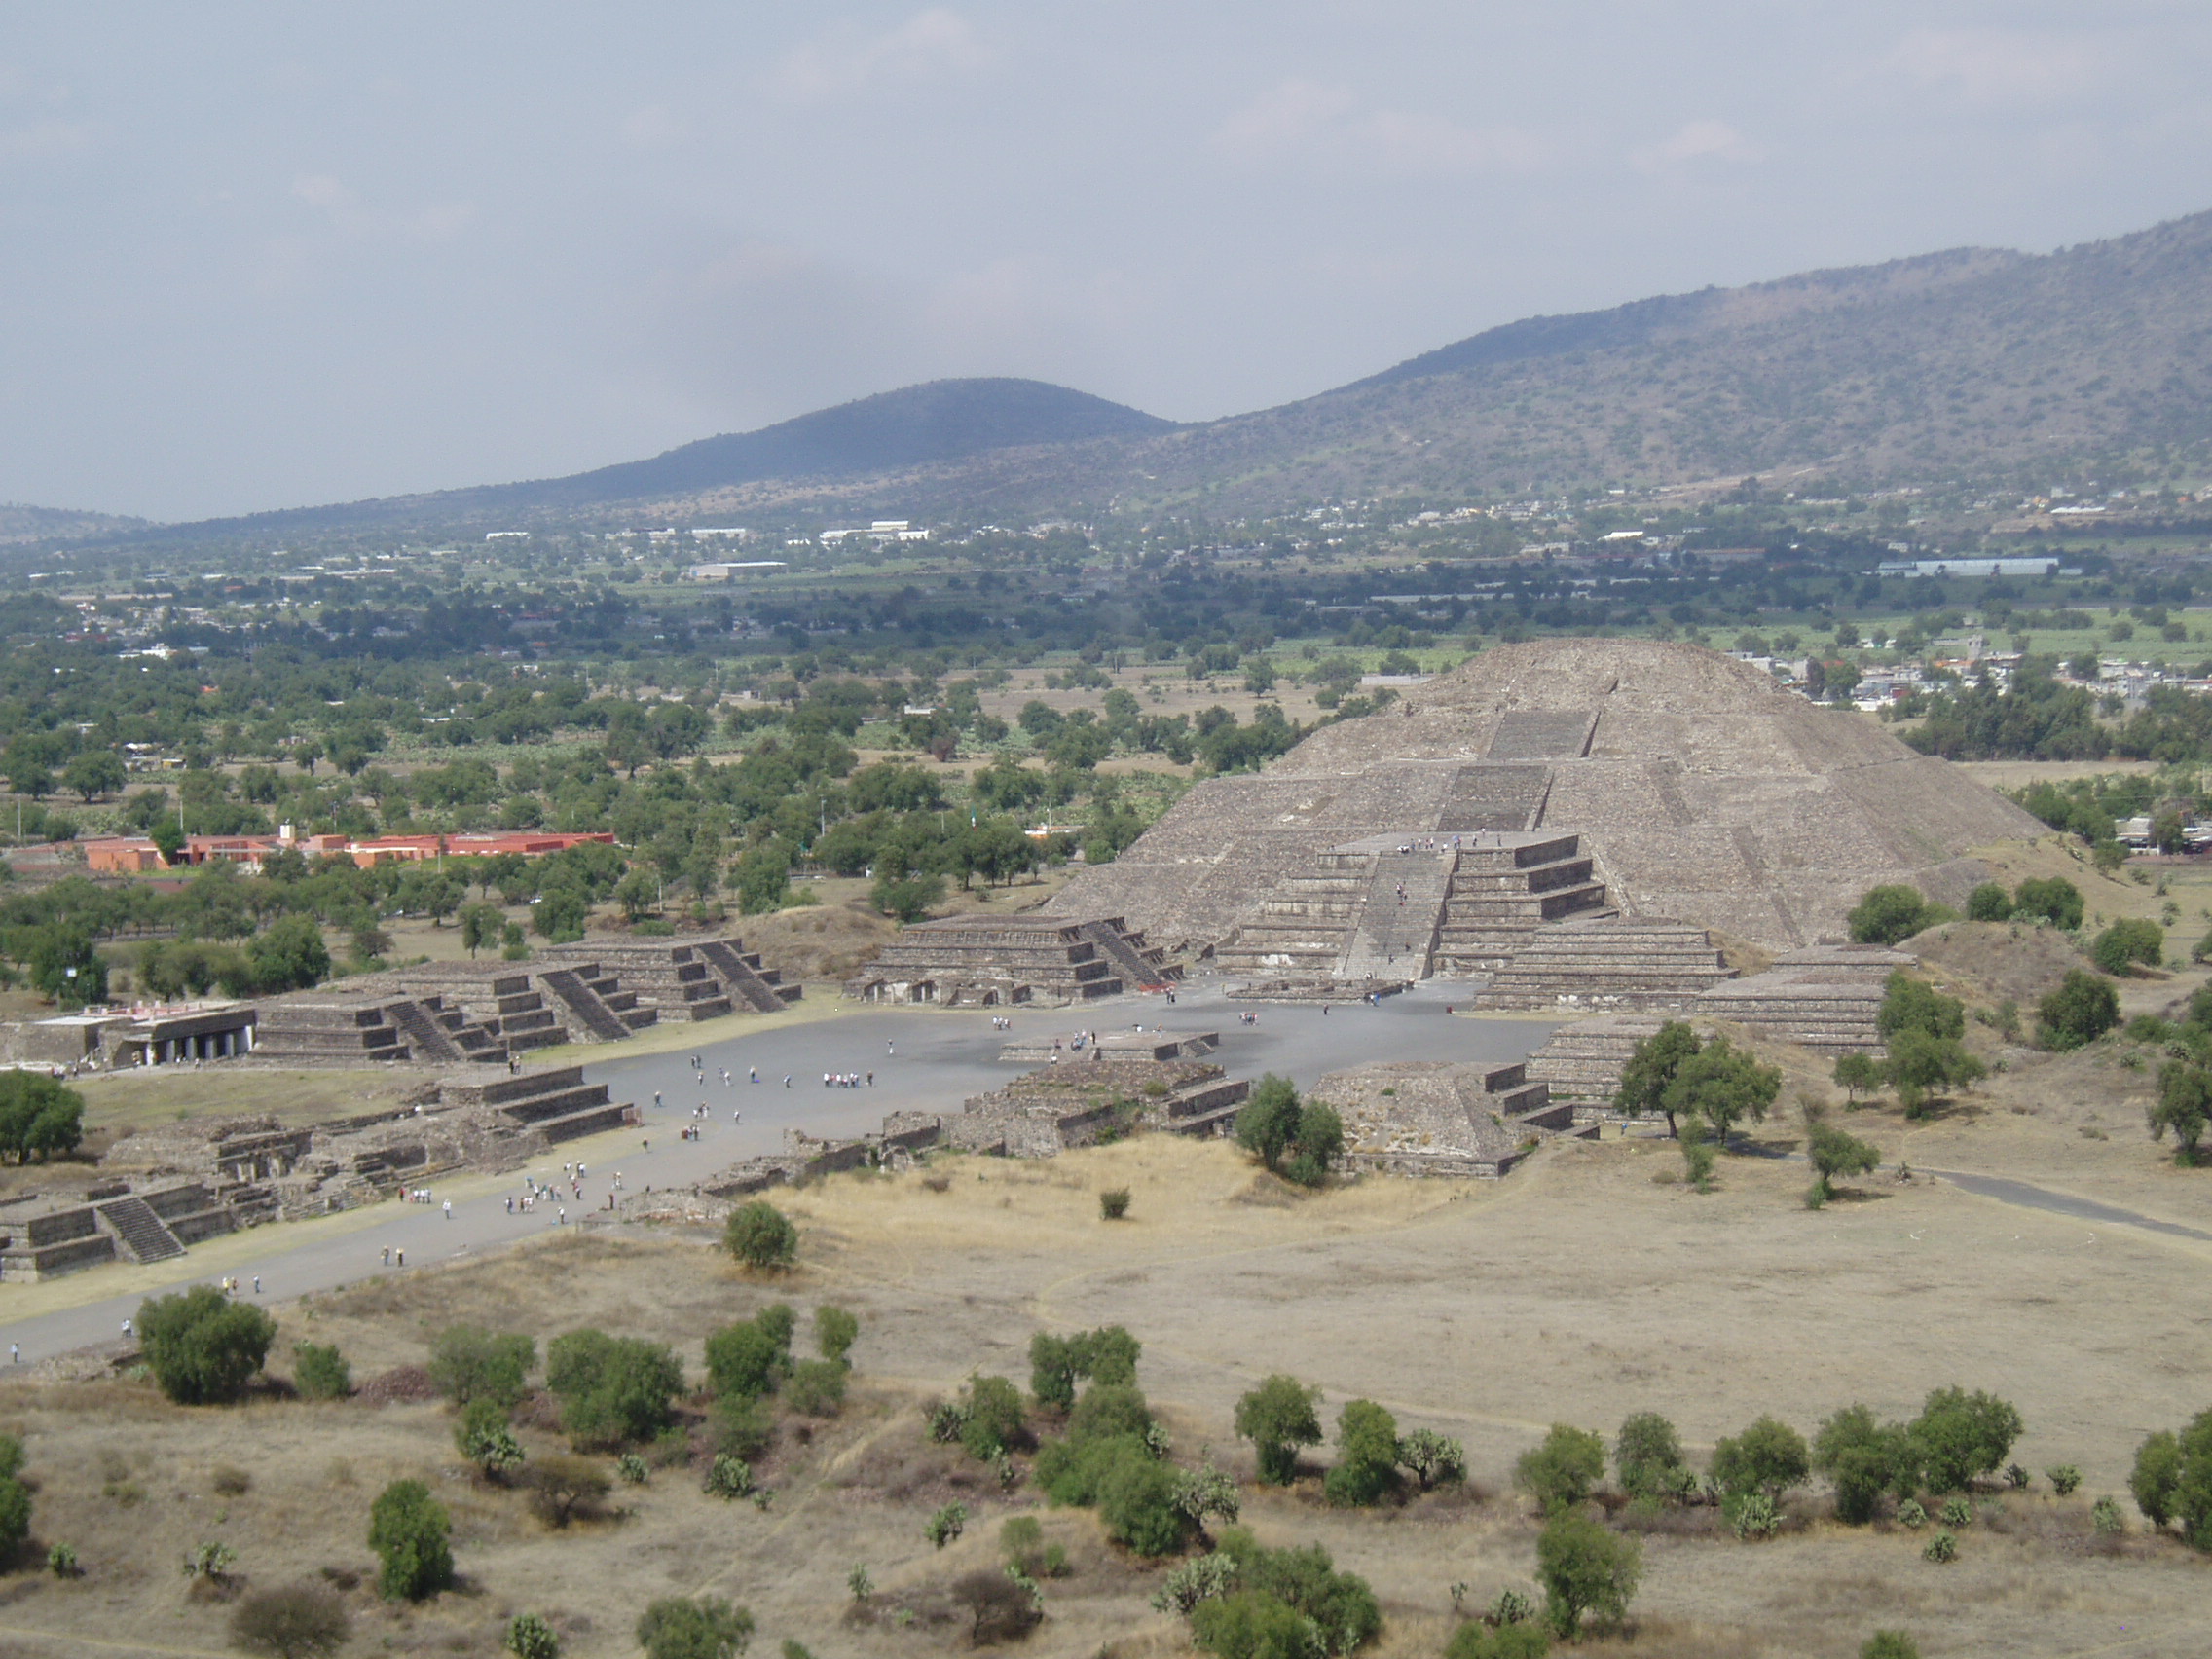 Pyramid of the Moon, Teotihuacan Teotihuacan is one of the most famous and important sites of ancient Mexico, best known for it's enormous Avenue of the Dead and the great pyramids of the Sun and Moon. Although the site was known in Aztec times as the 'Birthplace of the Gods' it is actually significantly older, with most of the major structures built between 100-250AD and the city, one of the largest ever ancient settlements in the Americas, was believed to have been still inhabited up to the 8th century. Today the vast scale of the complex, particularly the so called Avenue of the Dead, nearly 3km long and flanked by ancient ruins and terraces, continues to awe visitors. At the north end of the Avenue sits the Pyramid of the Moon, whilst it's much larger counterpart, the Pyramid of the Sun, sits halfway up it's eastern side. At the southern end sits the Ciudadela complex which centres on the smaller pyramid of Quetzelcoatl, earlier and more ruined than the larger pyramids but retaining it's stunning original sculptural decoration on part of it's western face, featuring the iconic feathered serpent heads. Aside from the great ceremonial structures there are also residential buildings, particularly the palatial complex at the north west corner that retains some vivid fragments of it's original mural decoration. en.wikipedia.org/wiki/Teotihuacan